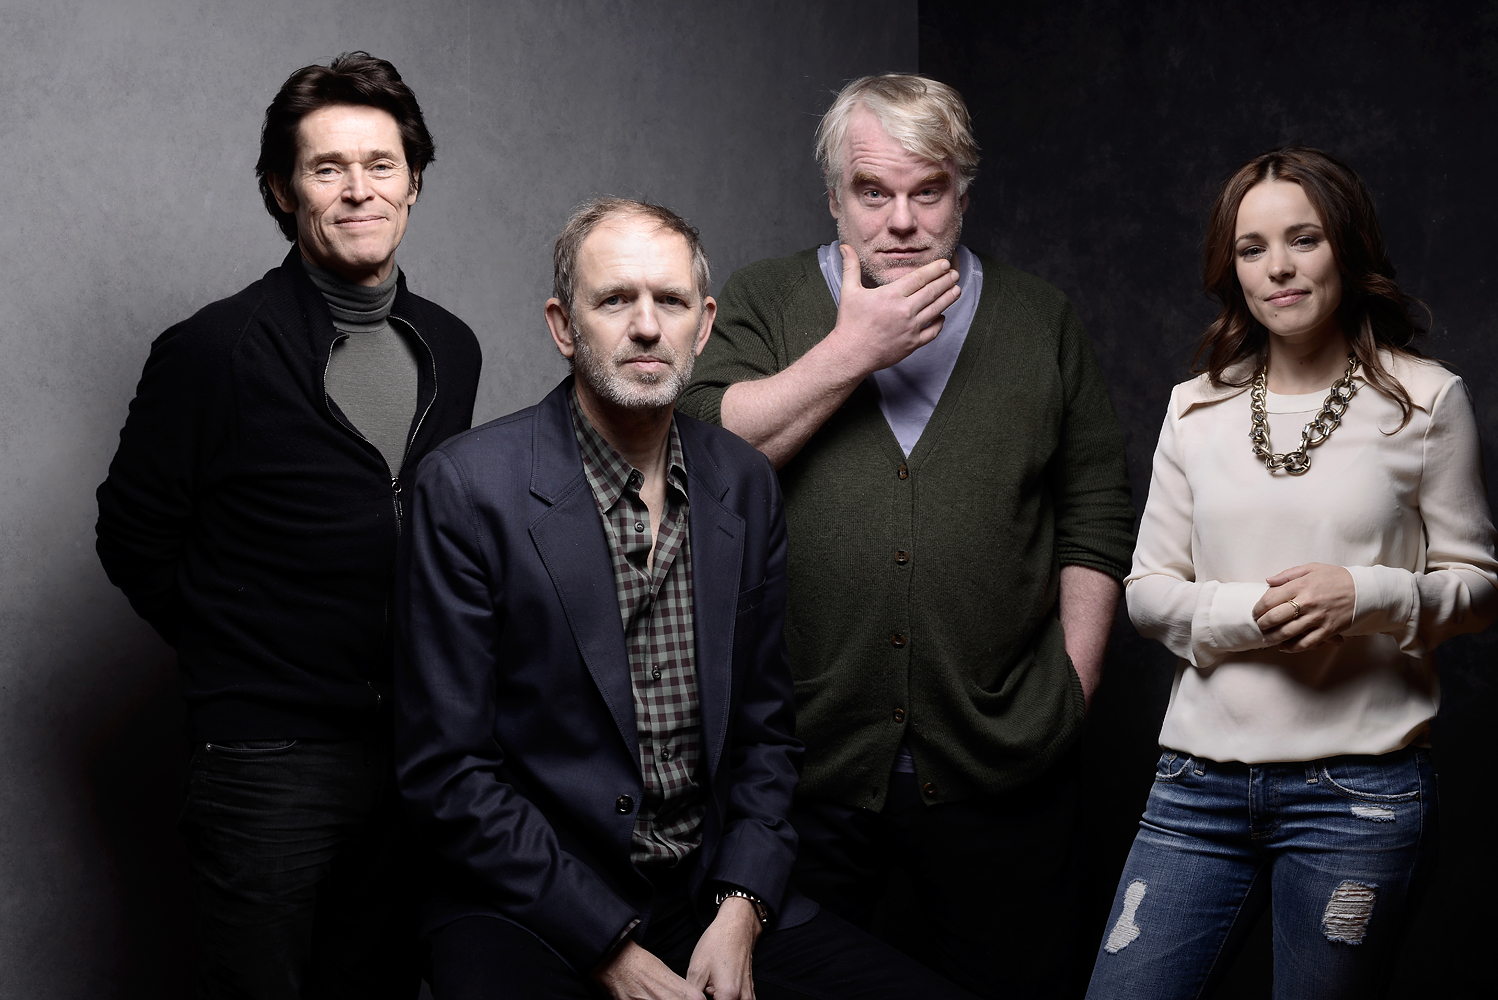 Actor Willem Dafoe, director Anton Corbijn, and actors Philip Seymour Hoffman and Rachel McAdams pose for a portrait during the 2014 Sundance Film Festival on January 19, 2014 in Park City, Utah. (Jeff Vespa / WireImage / Getty Images)